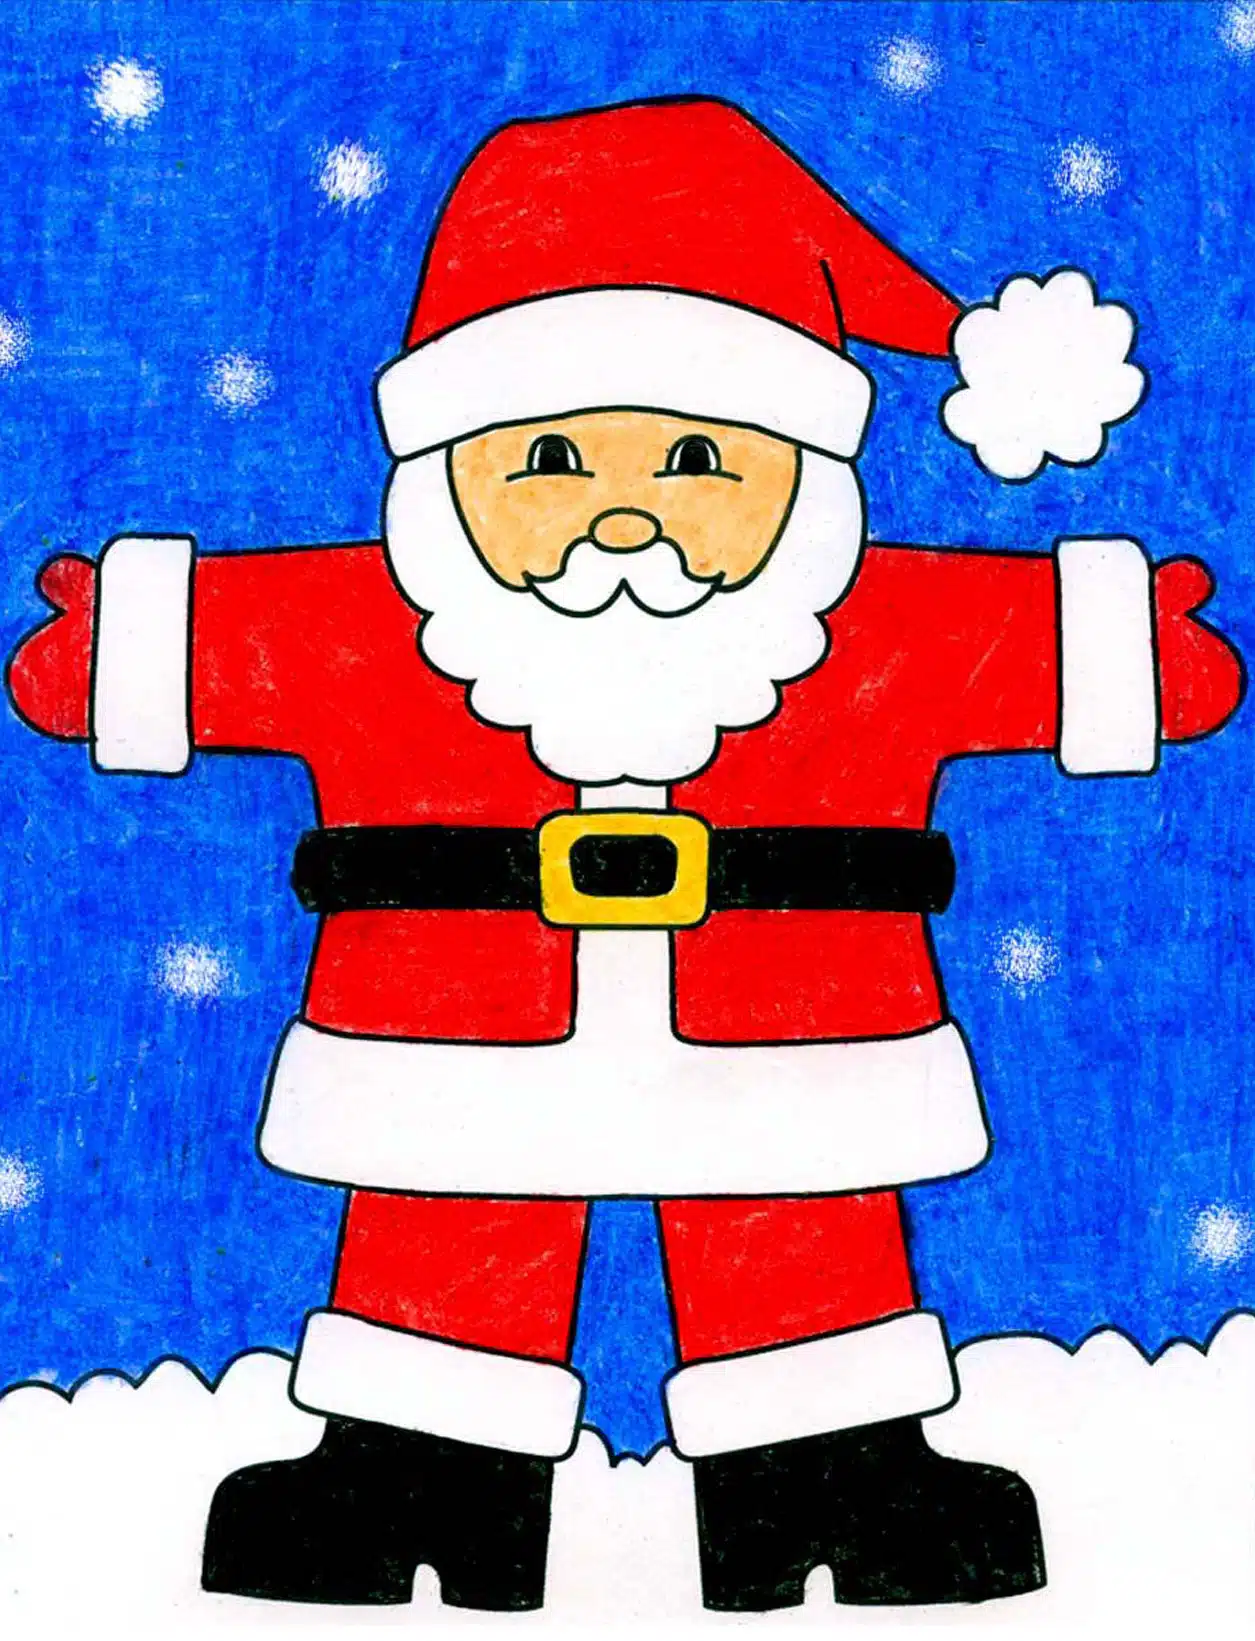 How To Draw Santa Claus - For Beginners - Cool Drawing Idea-saigonsouth.com.vn